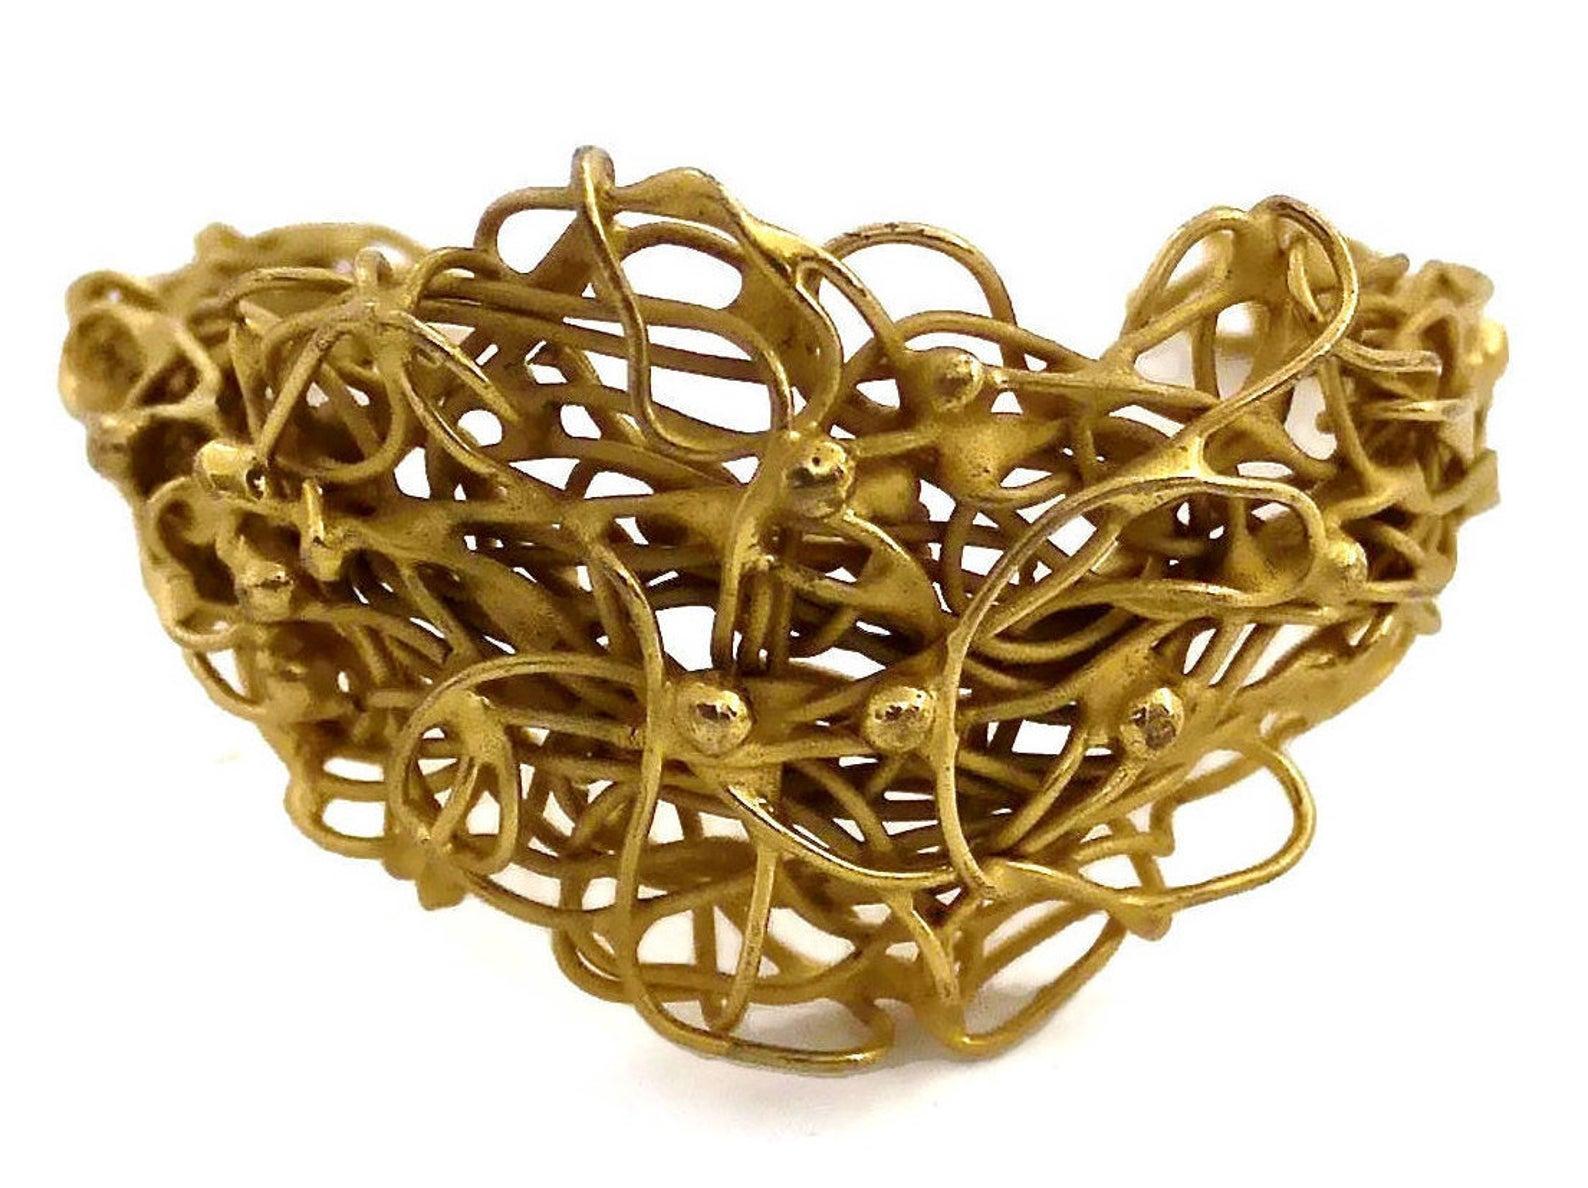 Vintage French Unsigned Knotted Coiled Wire Cuff Bracelet

Measurements:
Height: 1.6 inches (4 cm)
Inner Circumference: 7 inches (17.7 cm)

Features:
- Coiled and knotted wire pattern bracelet cuff.
- Gold tone.
- Unsigned piece (priced